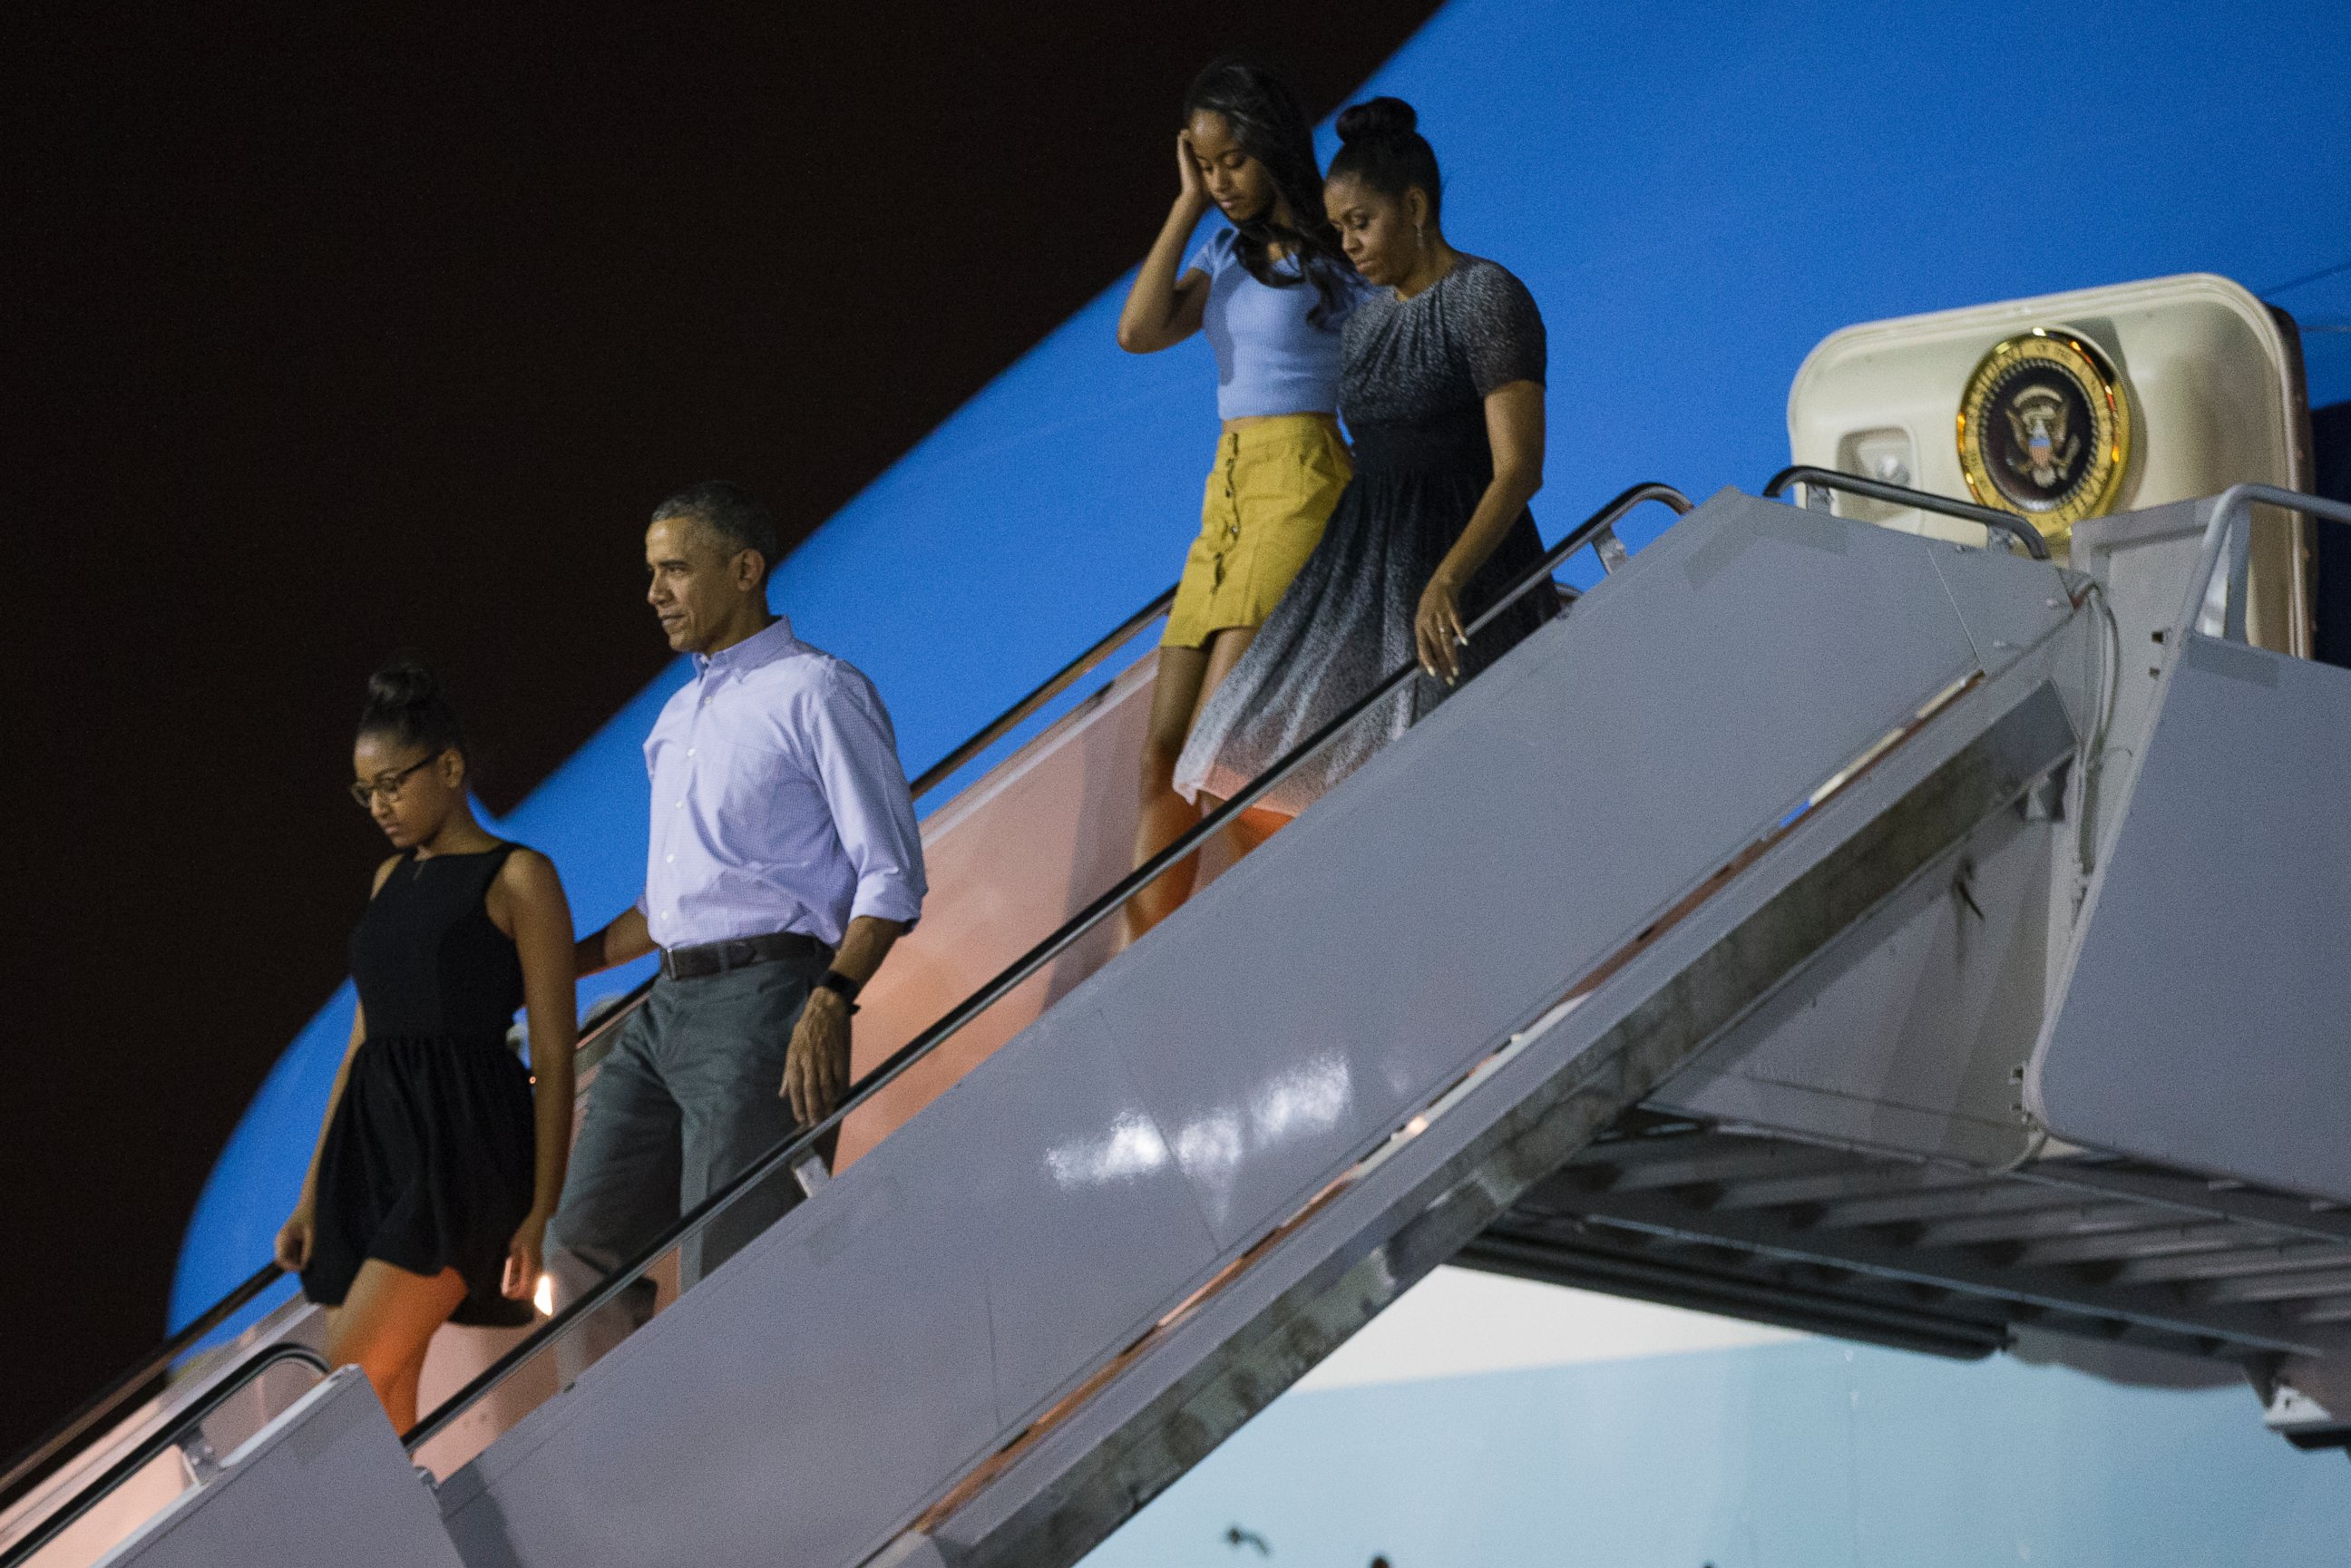 PHOTO: President Barack Obama, second from left, arrives at Joint Base Pearl Harbor-Hickam for a family vacation, on Saturday, Dec. 19, 2015, in Honolulu, Hawaii. From left, daughter Sasha Obama, Obama, daughter Malia Obama, and first lady Michelle Obama.